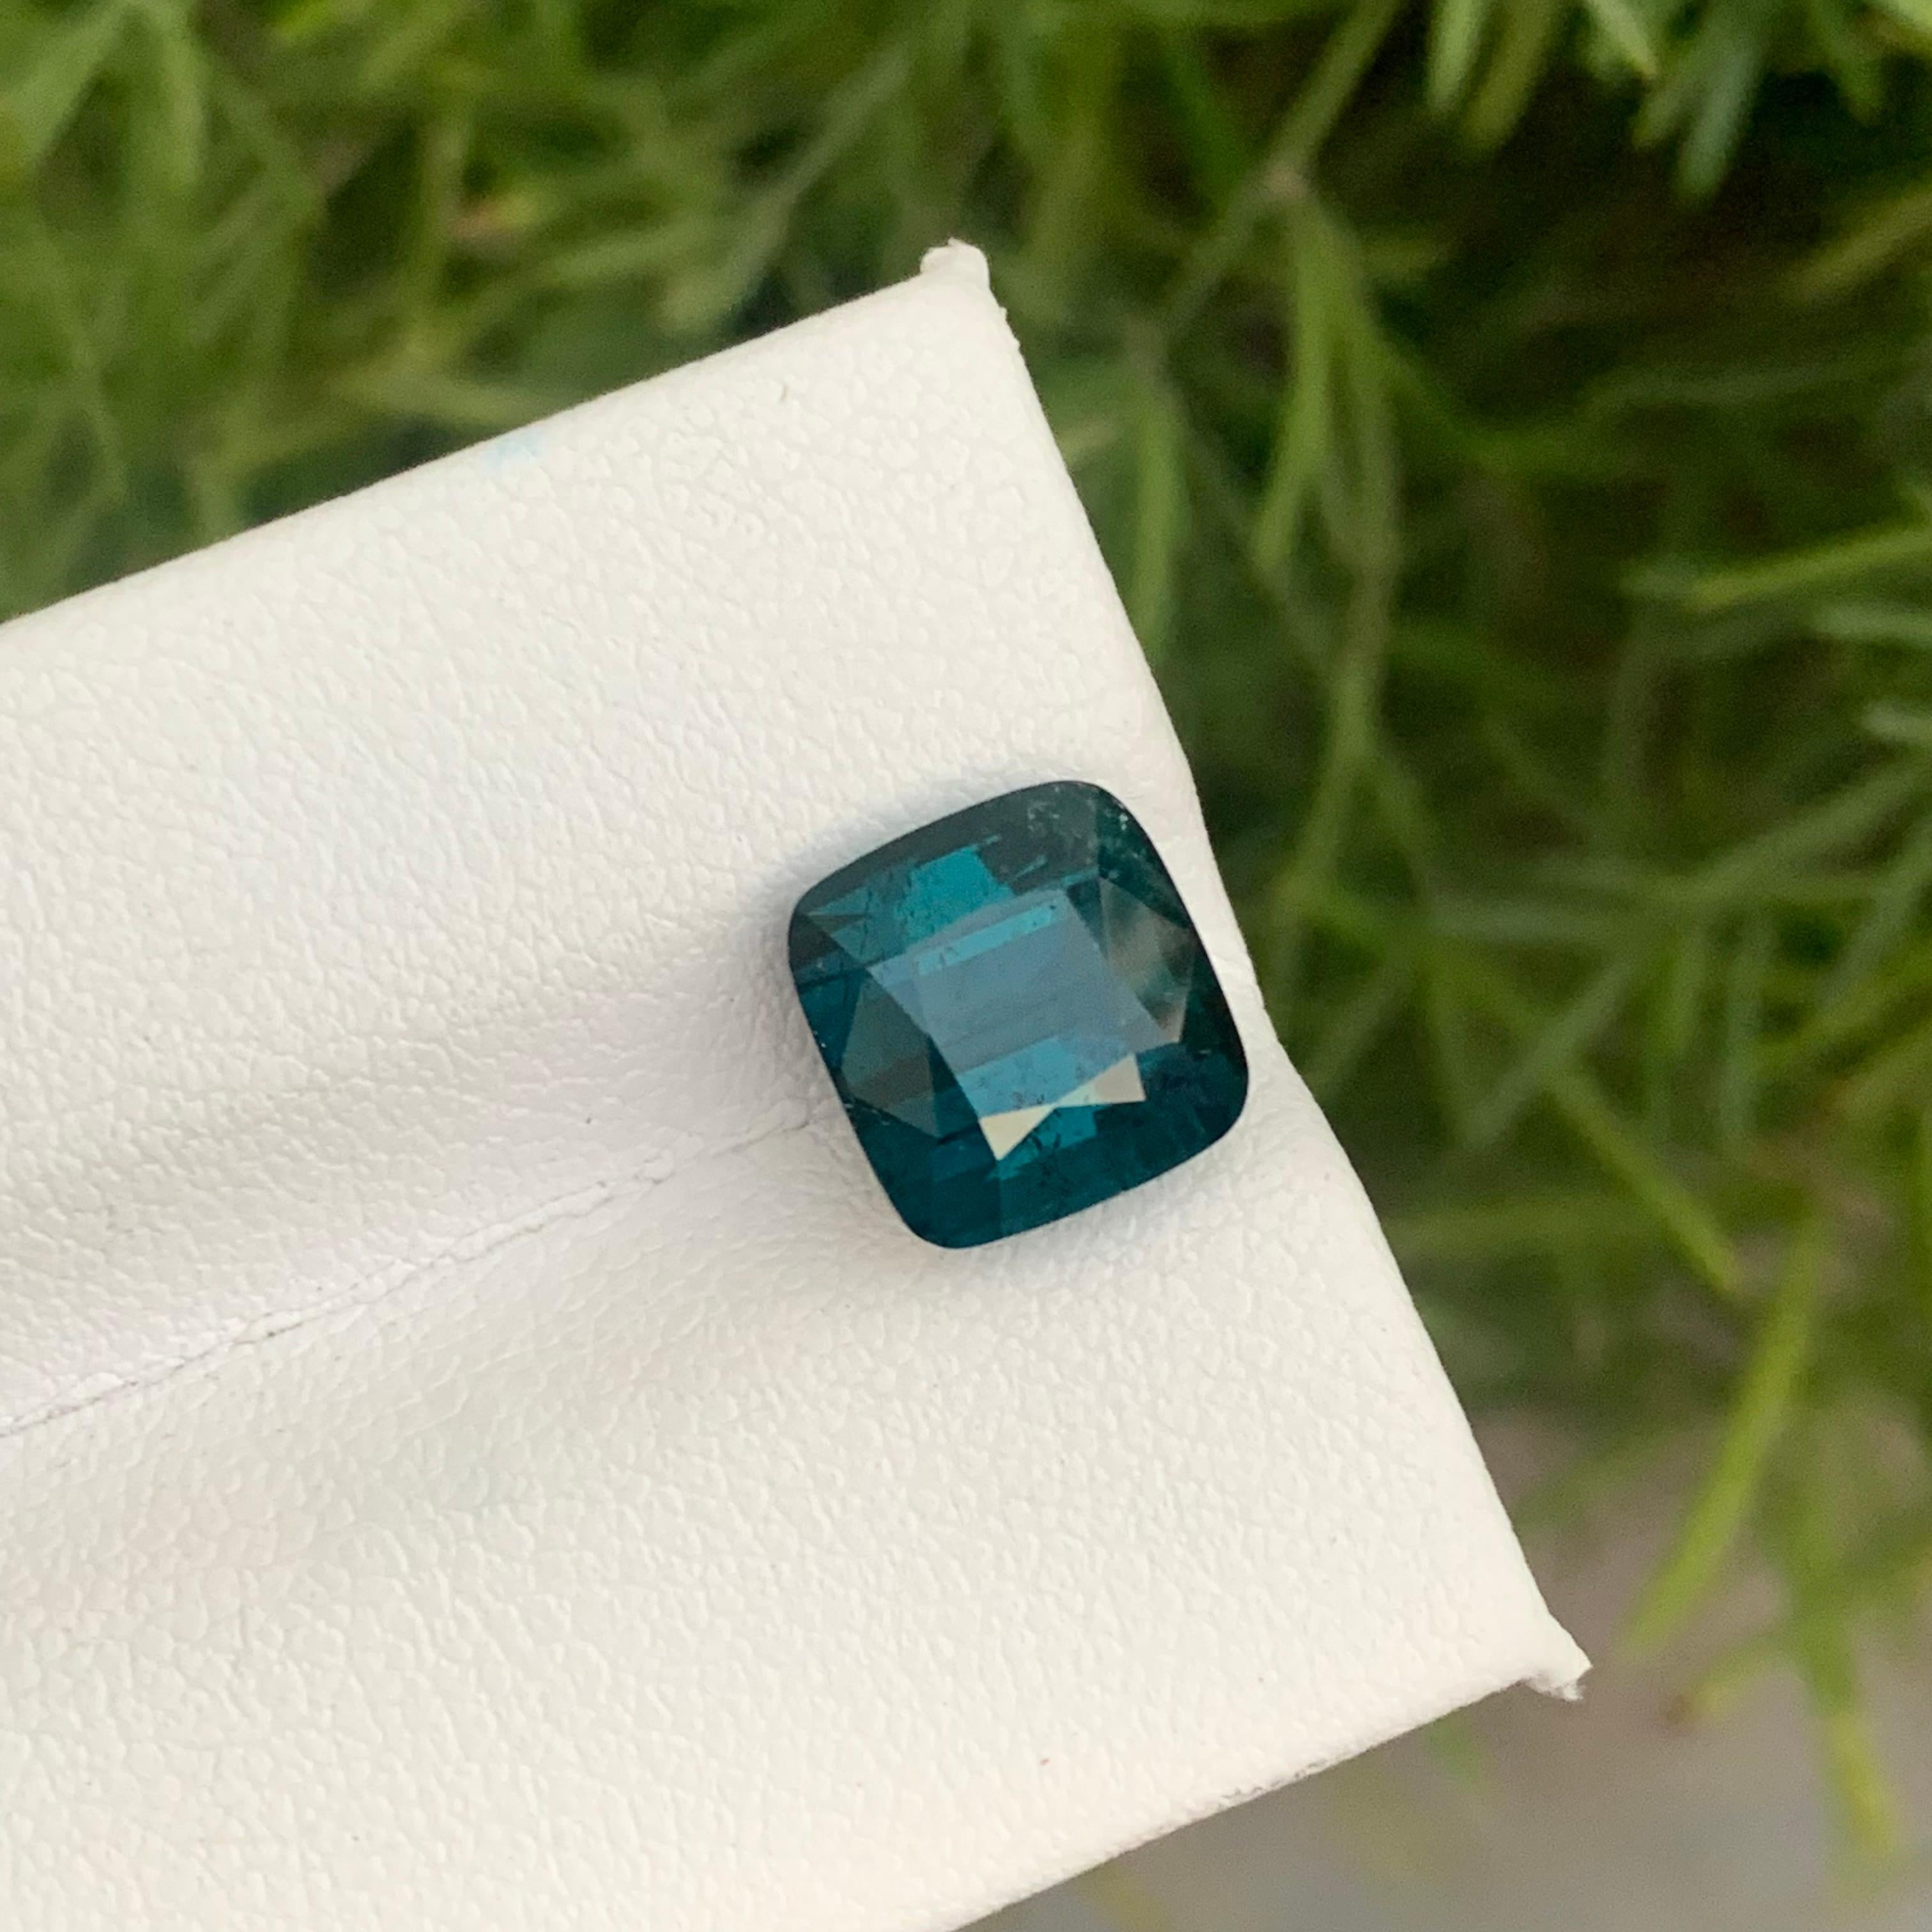 Gorgeous Loose Indicolite Tourmaline
Weight: 4.35 Carats
Dimension: 8.8x8.4x7 Mm
Origin; Kunar Afghanistan Mine
Color: Blue
Shape: Emerald
Treatment: Non
Certificate: On Demand
Indicolite tourmalines (tourmalines with blue in them) are rare.